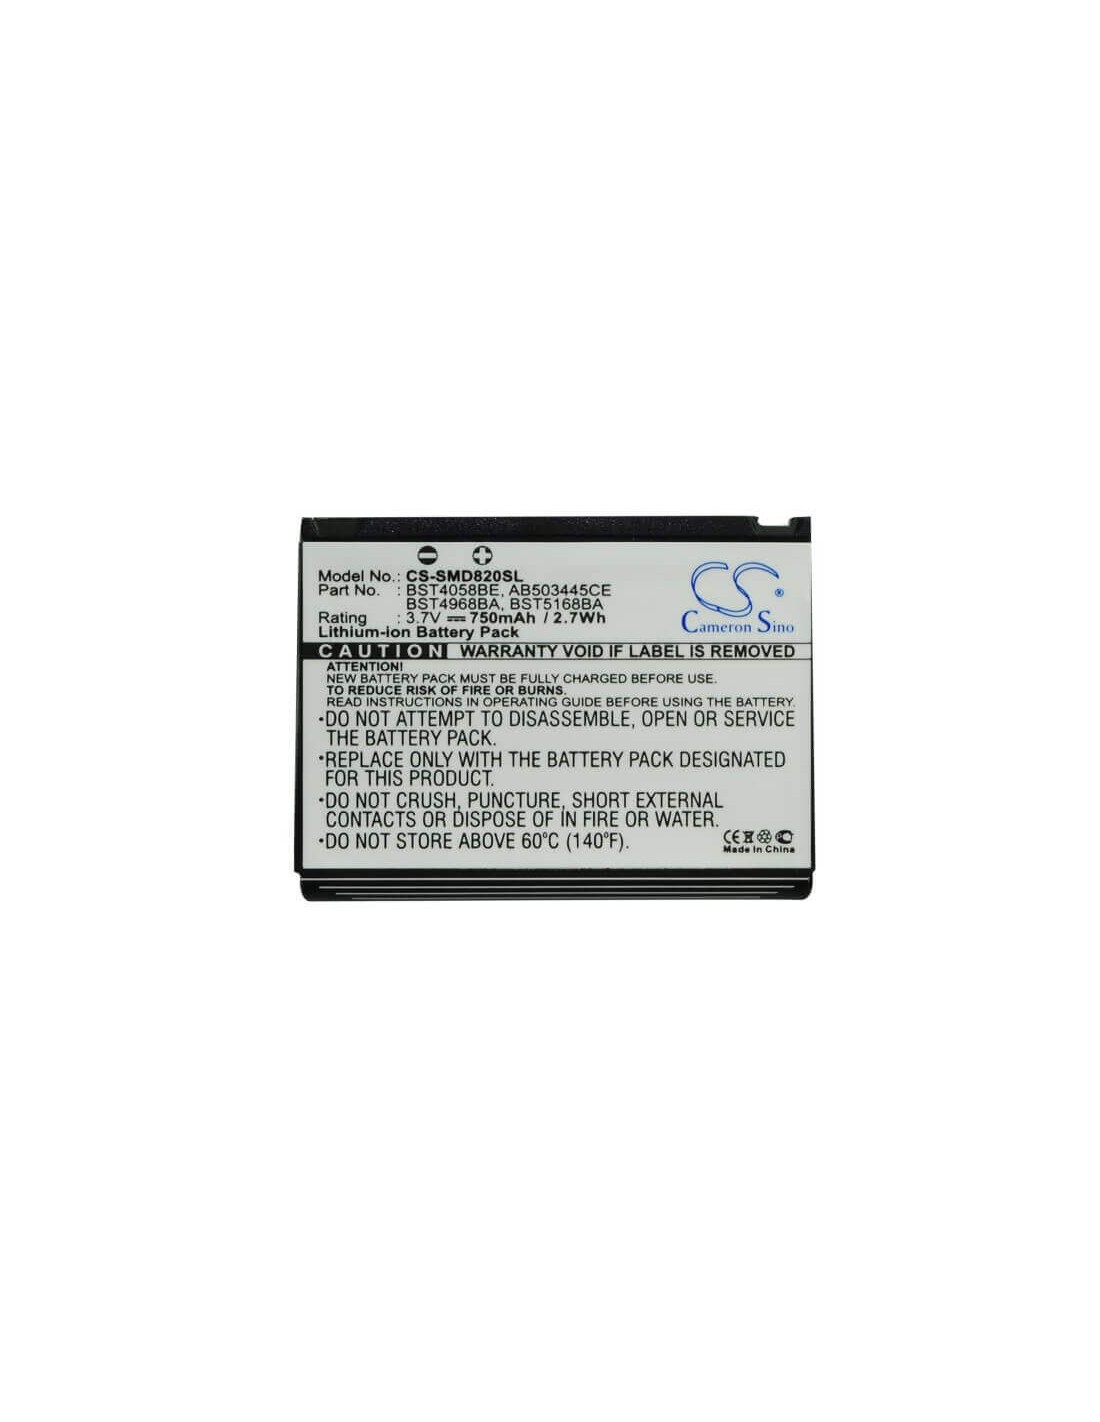 Battery for Samsung SPH-A900, SPH-A900M, Blade 3.7V, 750mAh - 2.78Wh